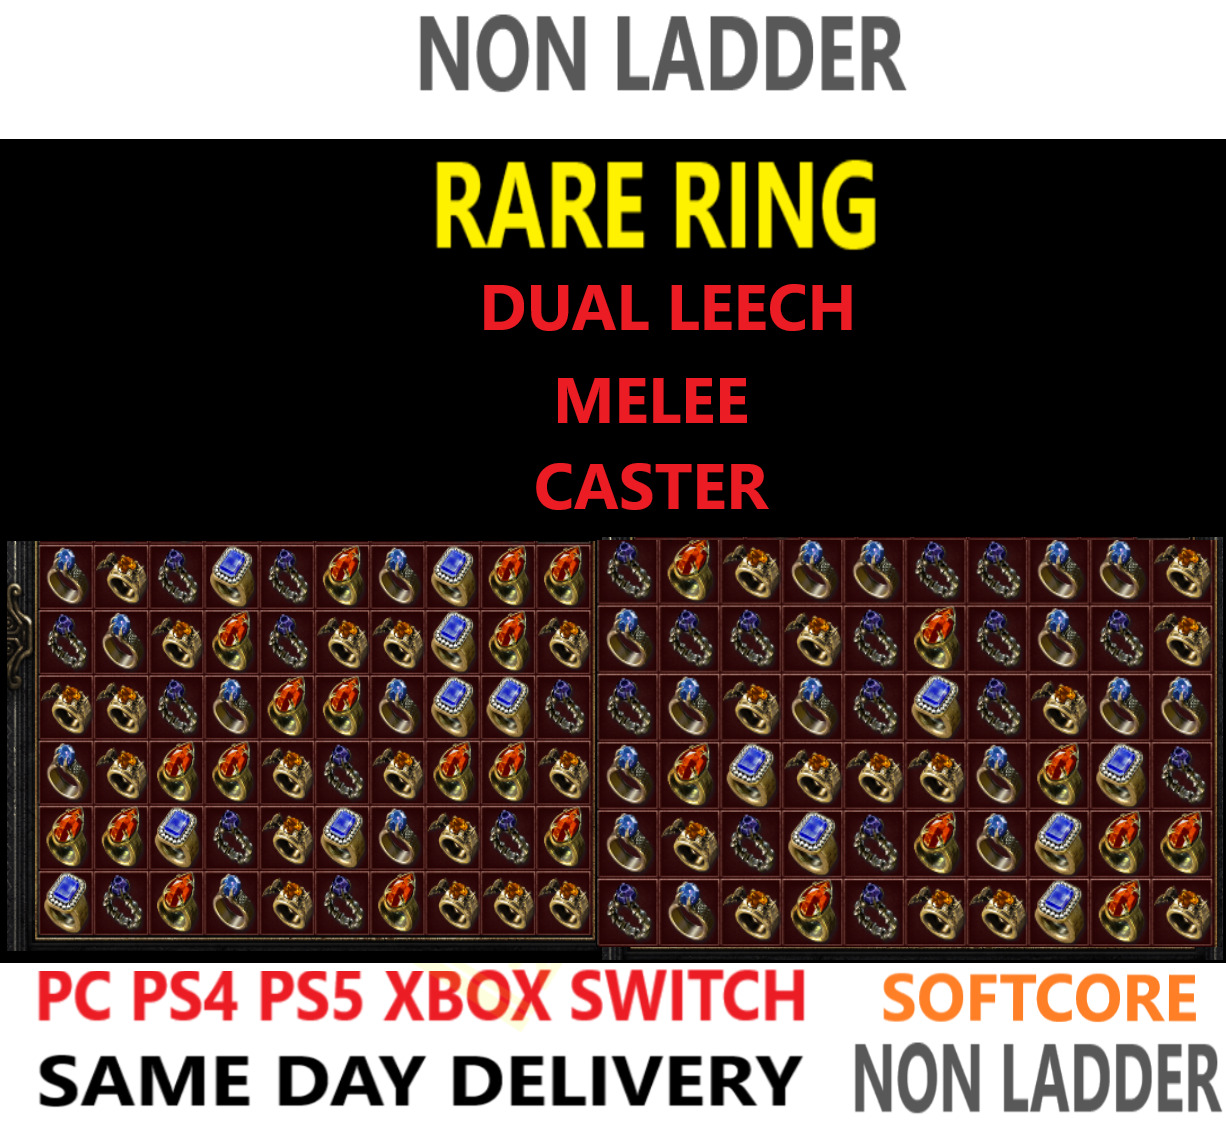 RARE RINGS NON LADDER ✅PC PS4 PS5 XBOX SWITCH✅ DIABLO 2 RESURRECTED D2R ITEMS